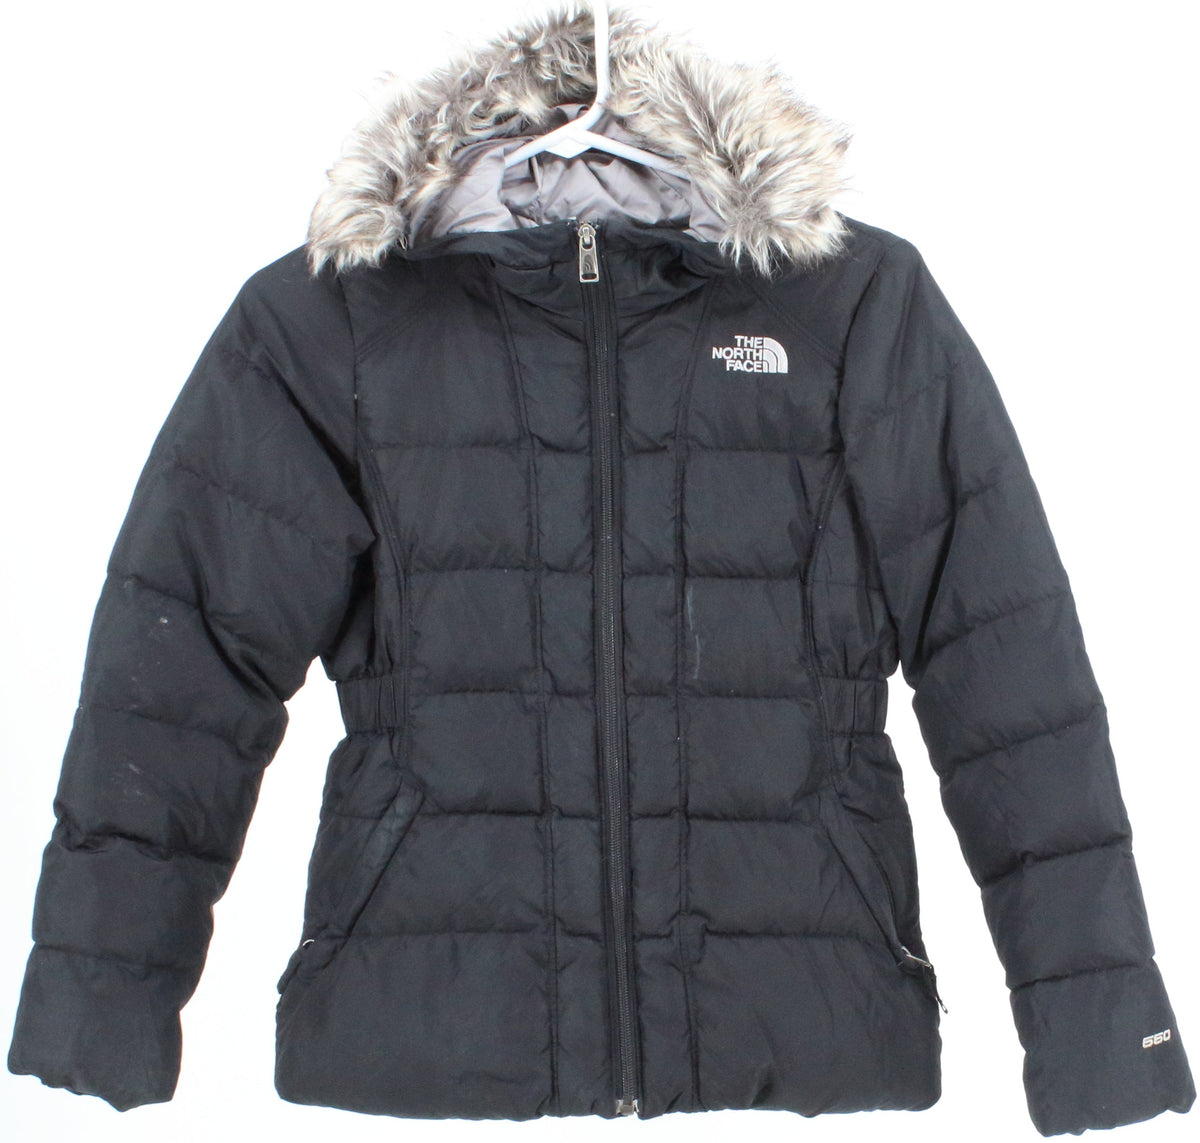 The North Face Black Goose Down Girl's Jacket